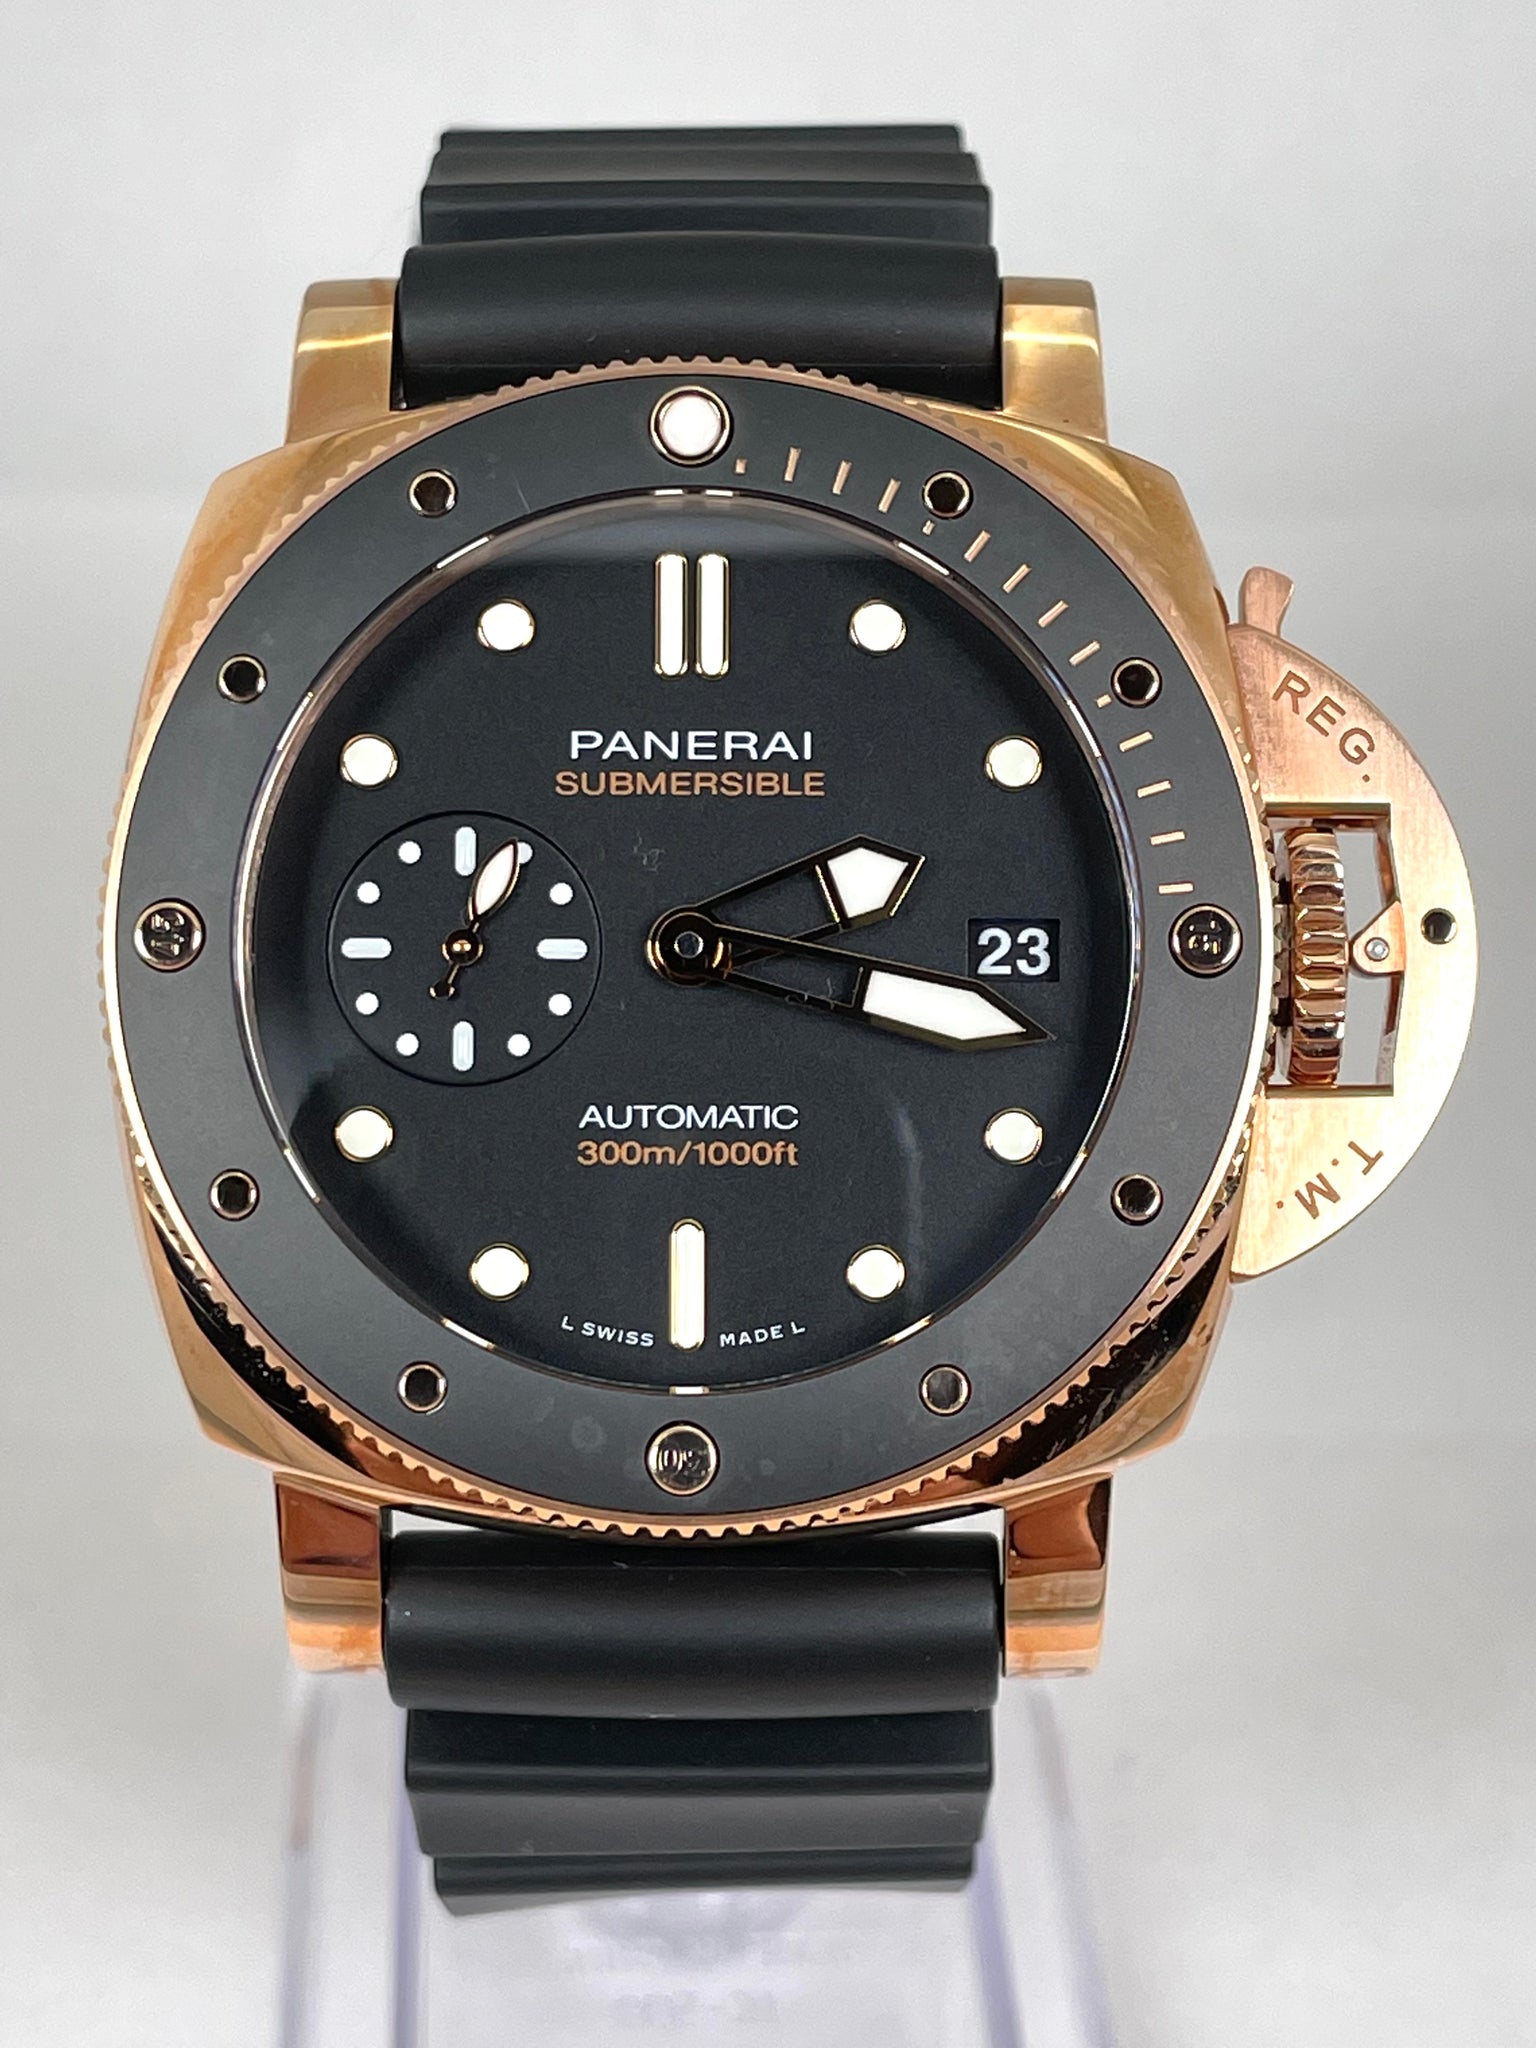 Panerai Submersible Goldtech OroCarbo Pam 1070 01070